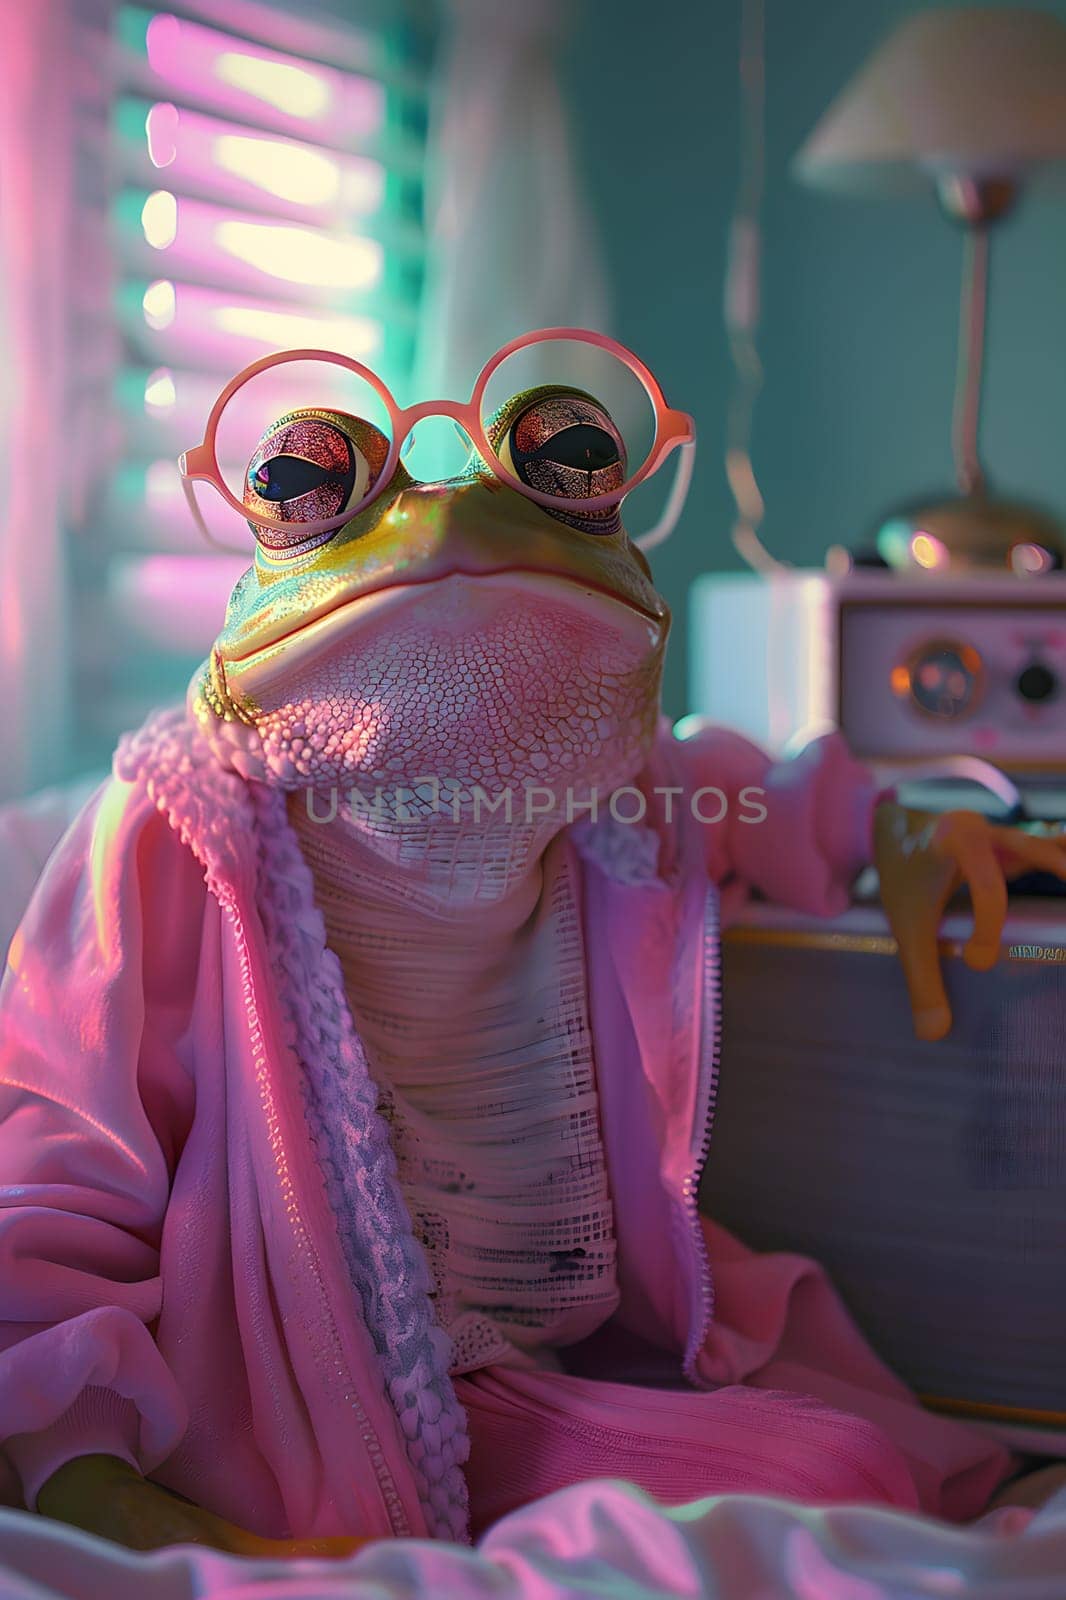 A fun Magenta frog with Vision care wearing Pink eyewear and robe on bed by Nadtochiy